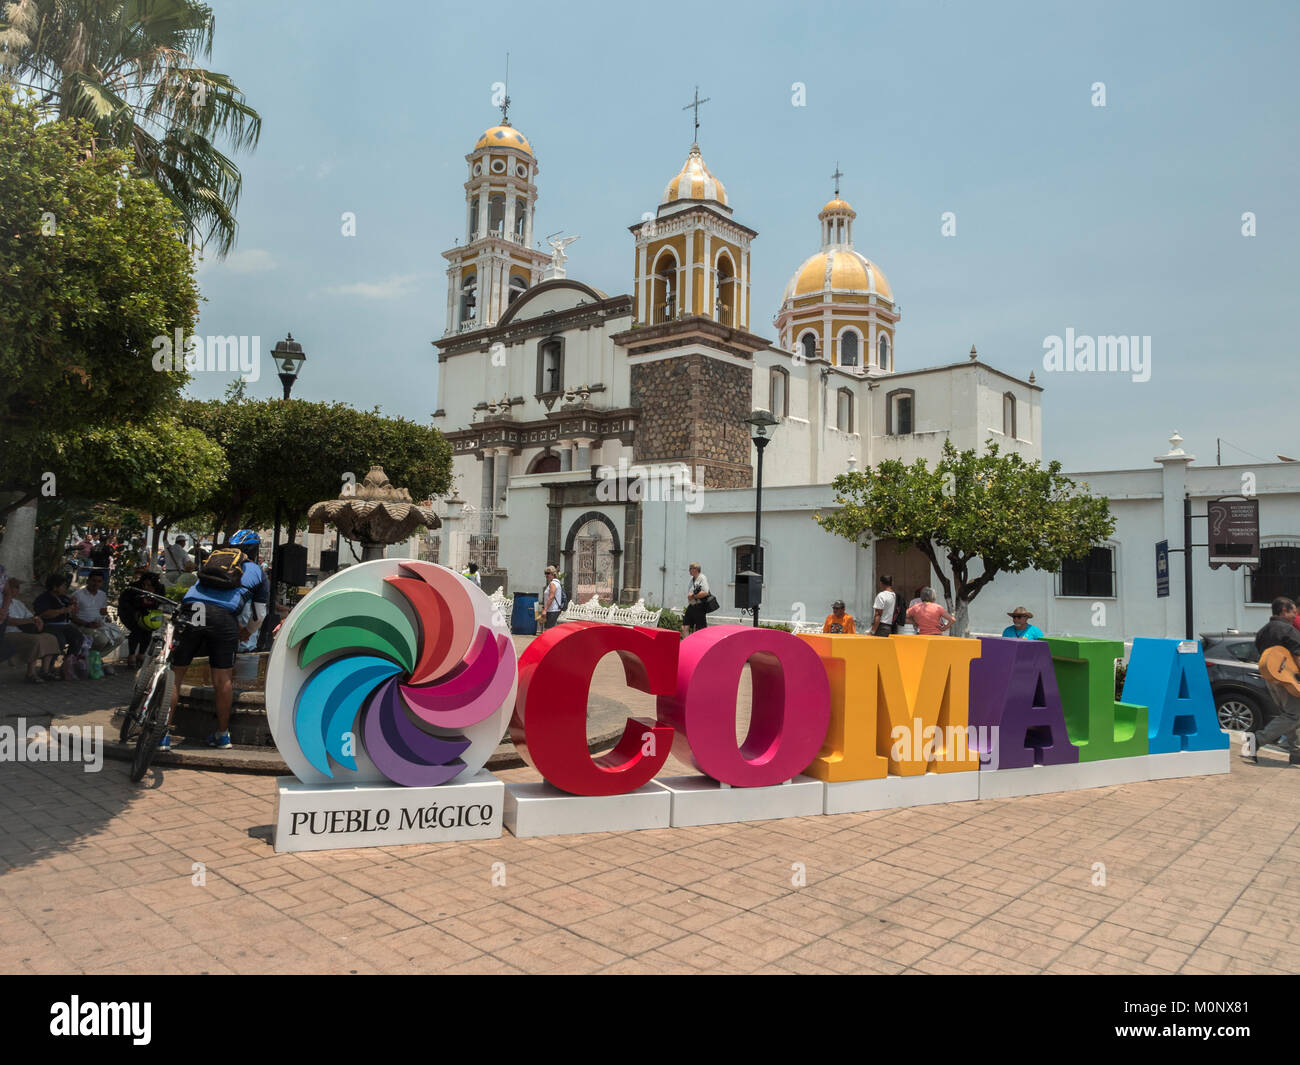 Tourists Pose In Front Of The Colourful Sign Comala A Pueblo Magico The Church of Noguerasâˆ’Iglesia de Nogueras In The Background Colima Mexico Stock Photo